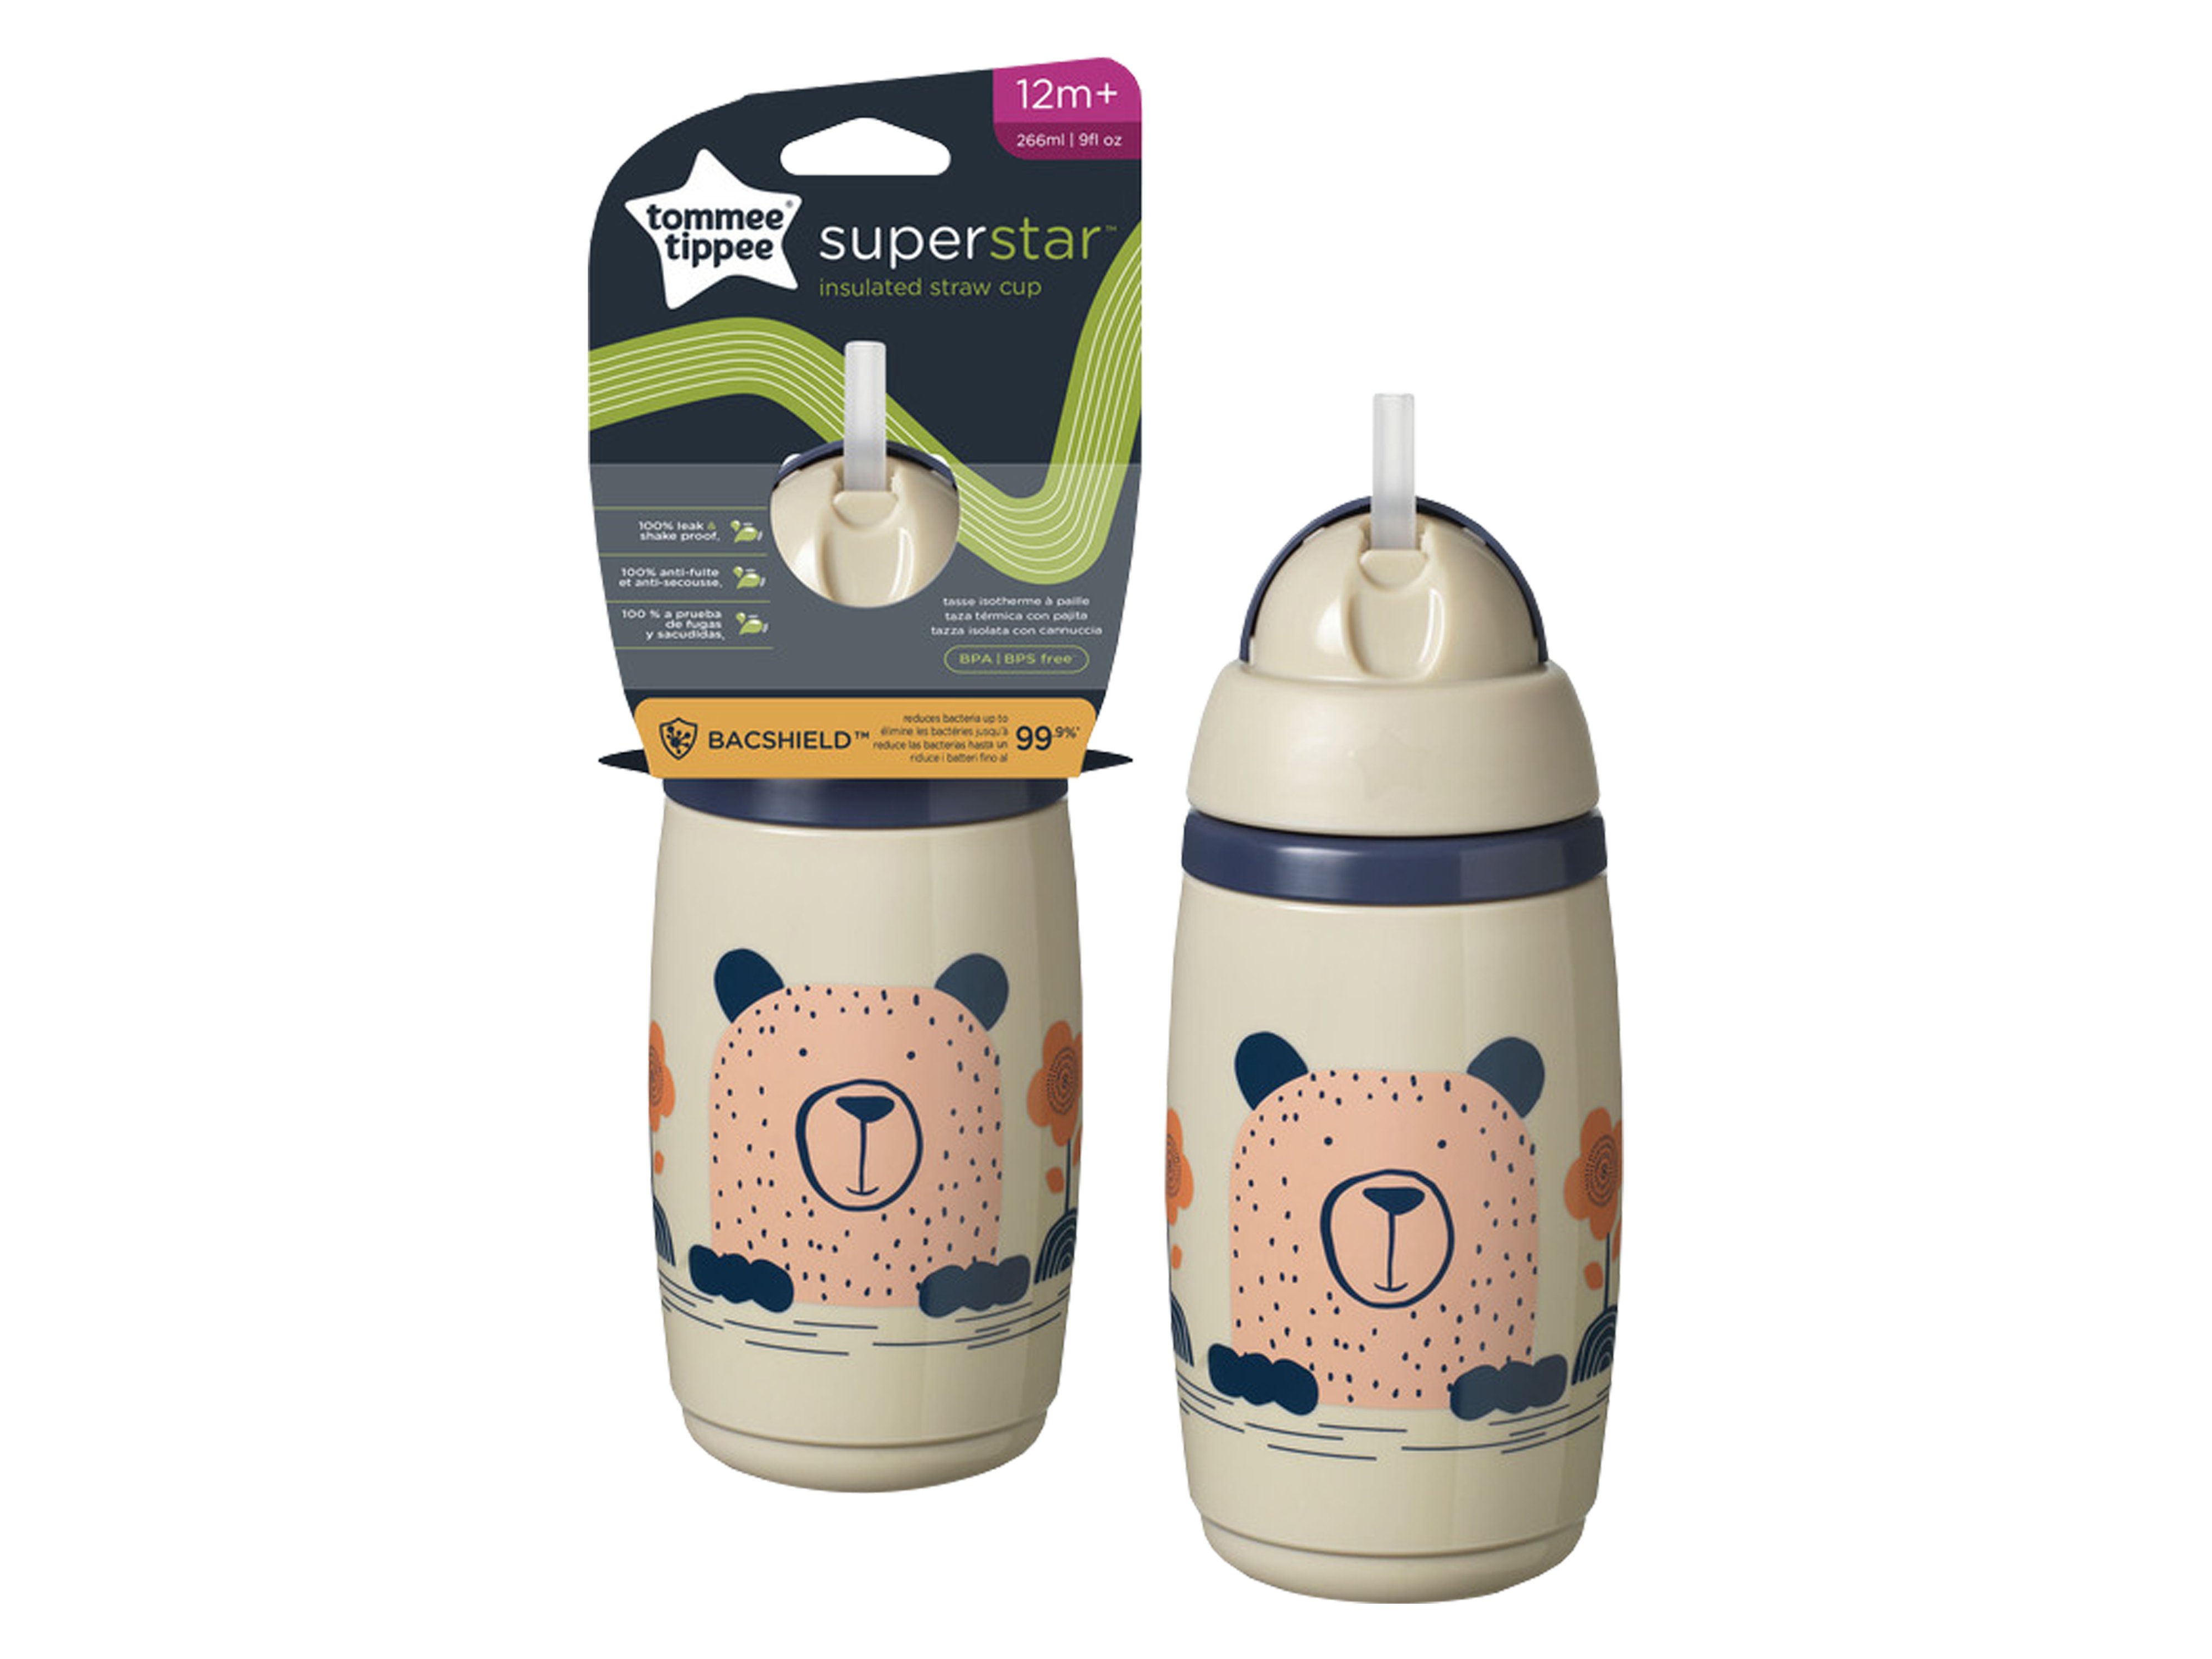 Tommee Tippee Superstar Insulated Straw Cup 12md+, beige, 1 stk.